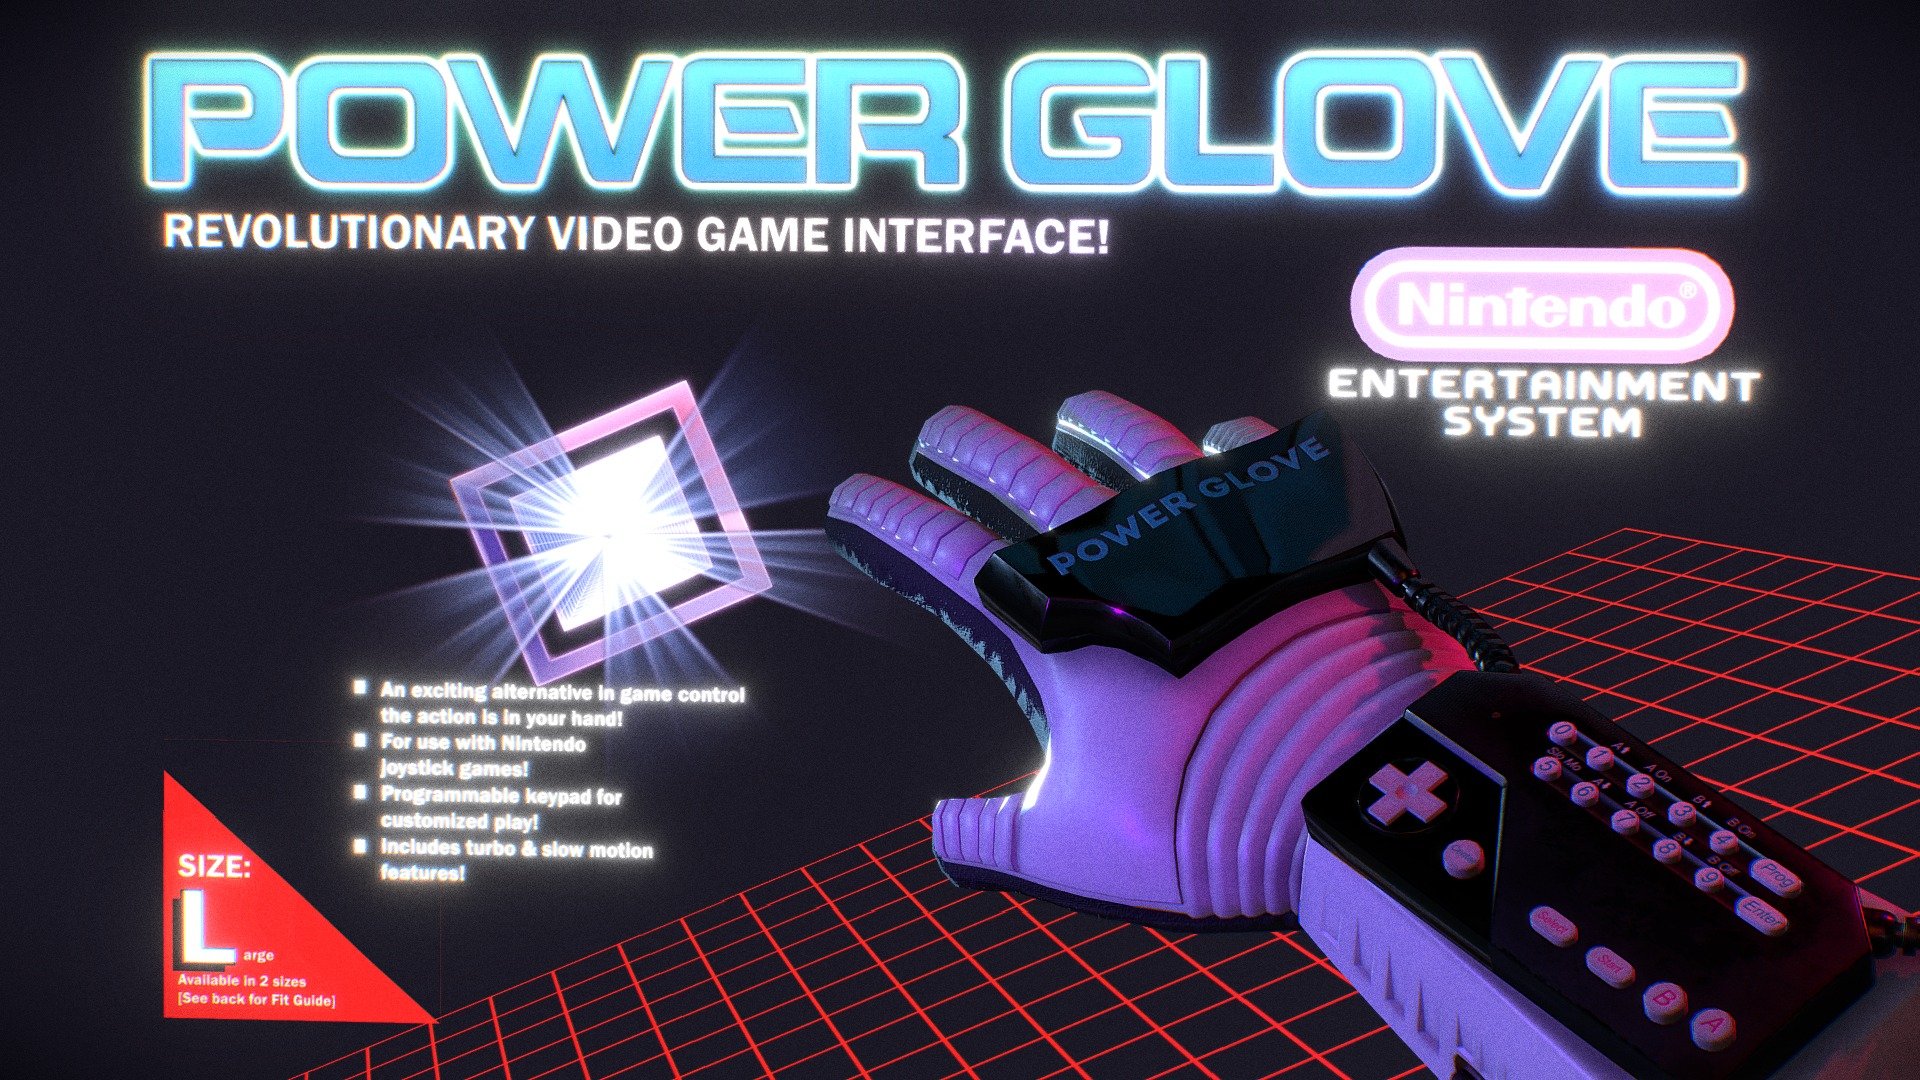 Power Glove!!  Gaming Gadget from Nintendo in 1989s that will give a Great experience game for you!!! - Power Glove: Revolution Video Game Interface!! - 3D model by BankmanGameAsset (@Asakura1984) 3d model